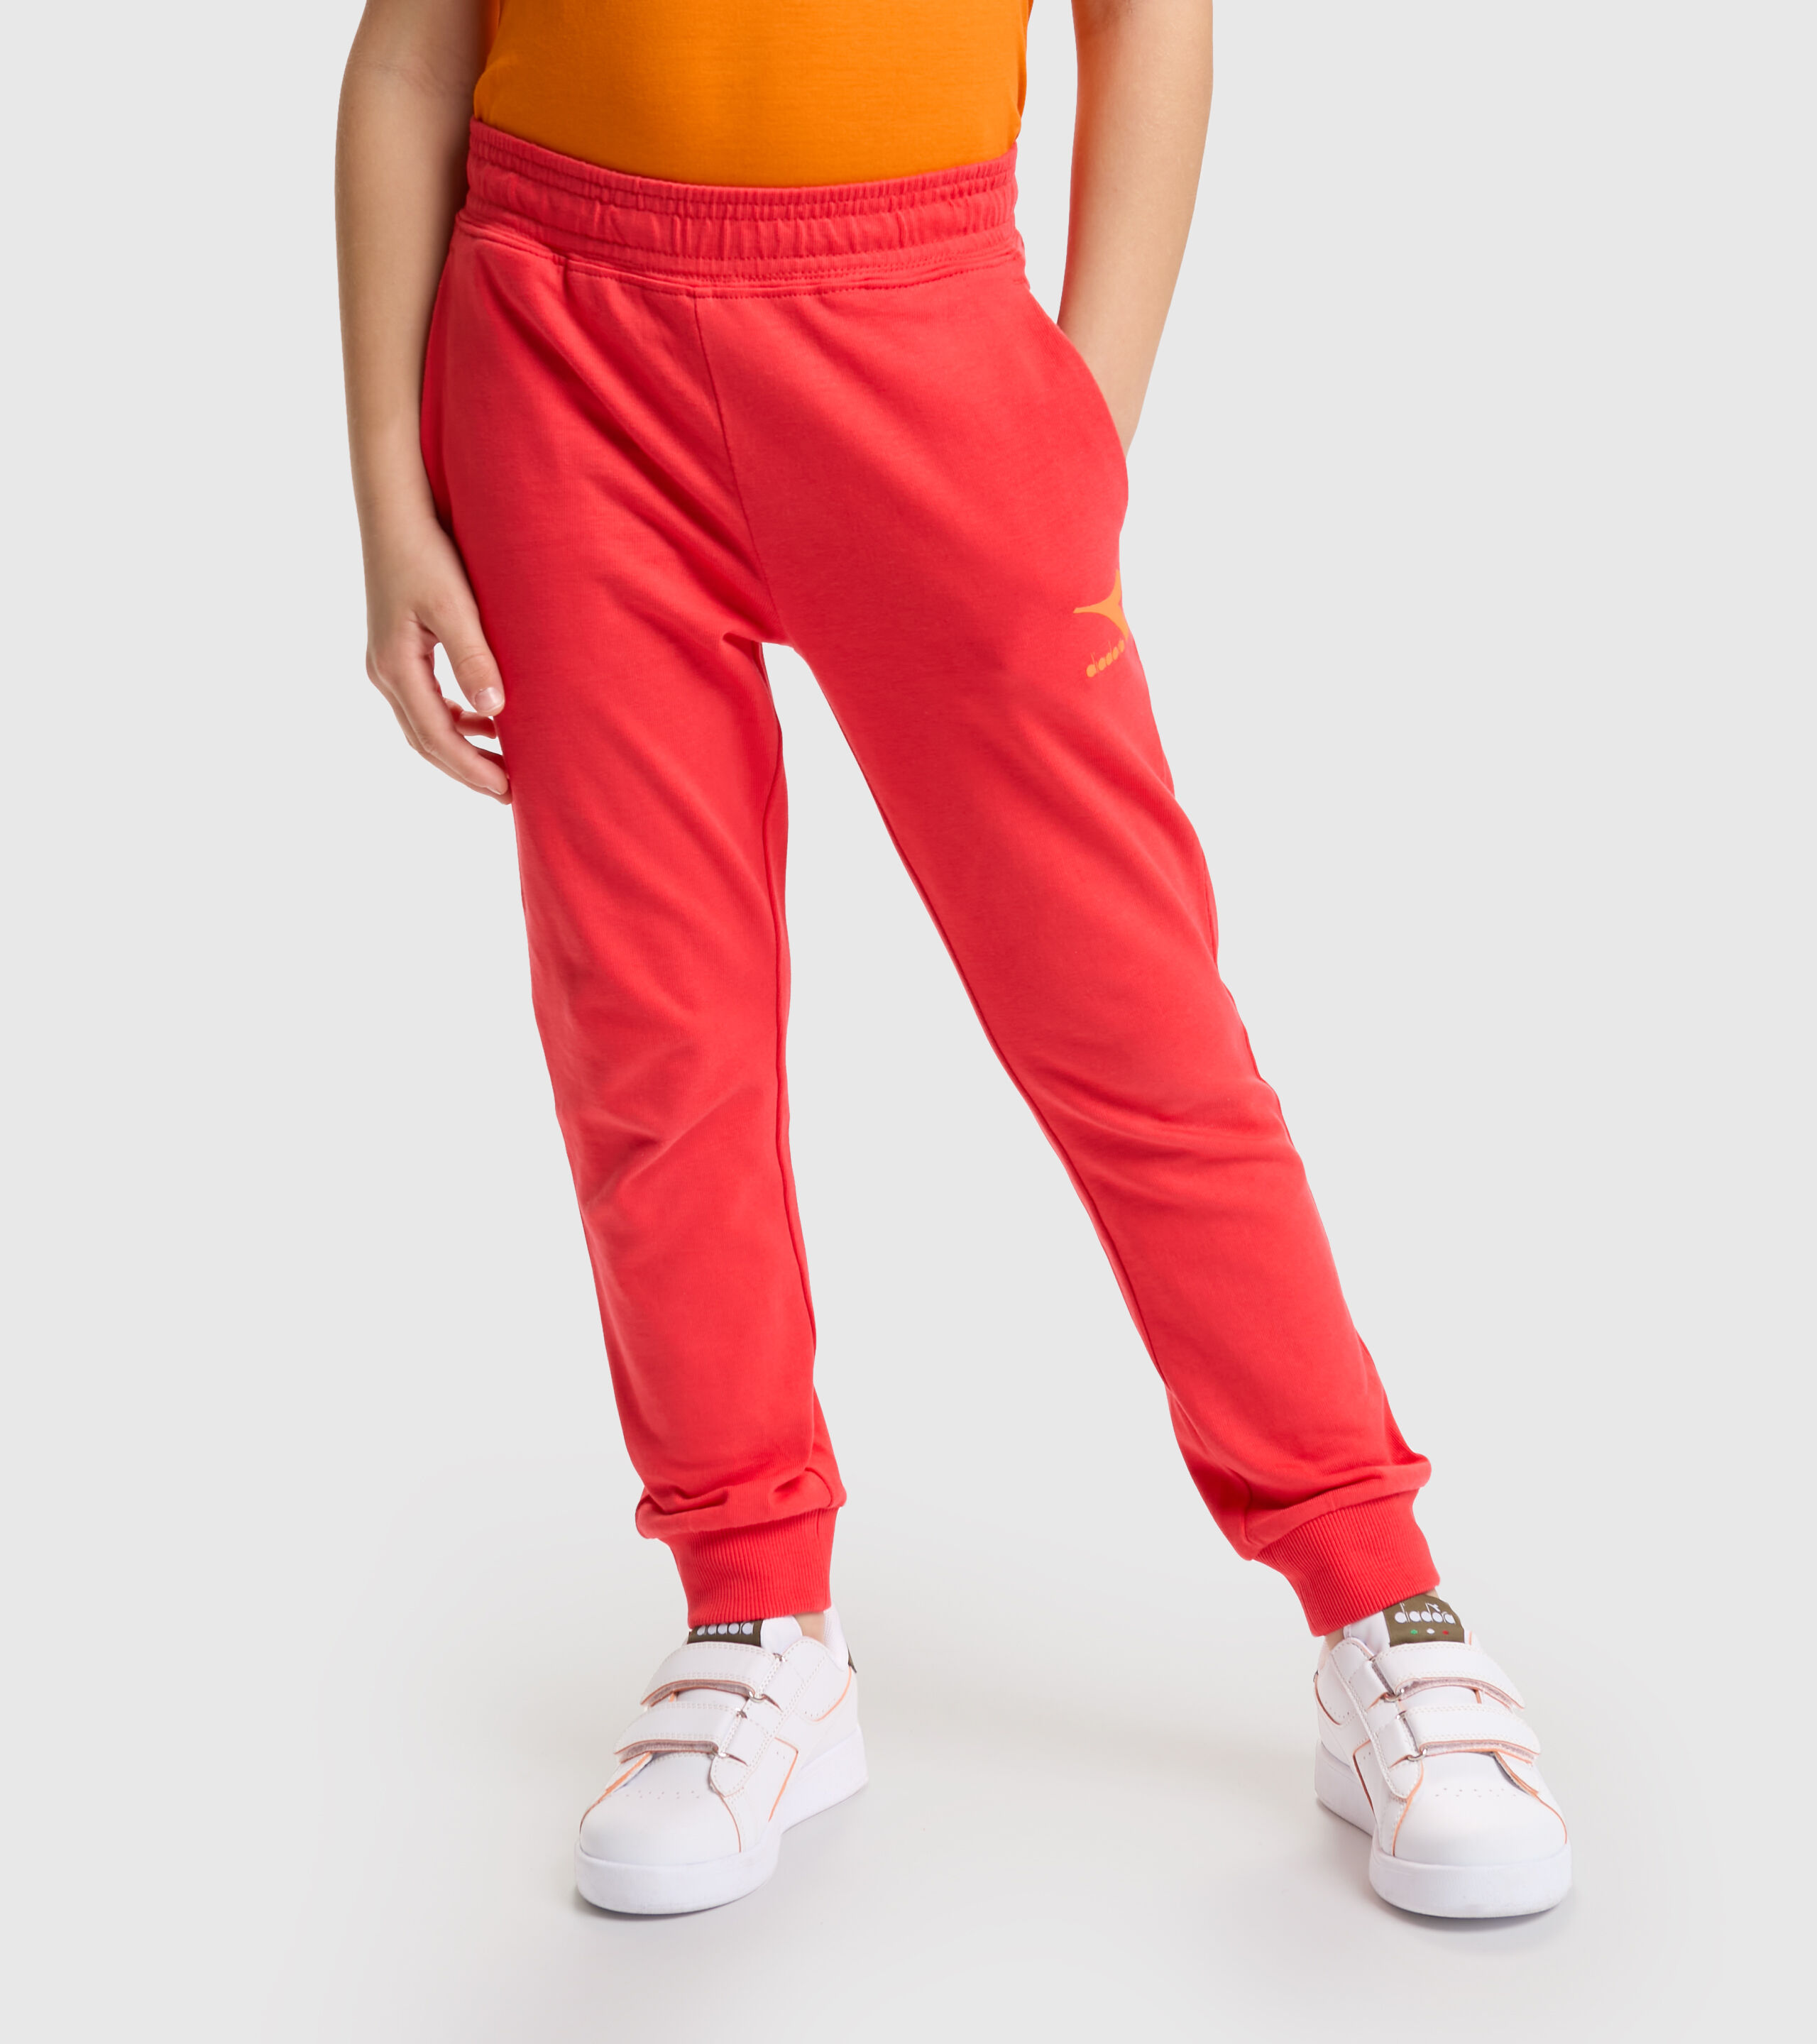 Puma Pi Knit Track Pants Women Black Sweatpants Buy Puma Pi Knit Track  Pants Women Black Sweatpants Online at Best Price in India  Nykaa